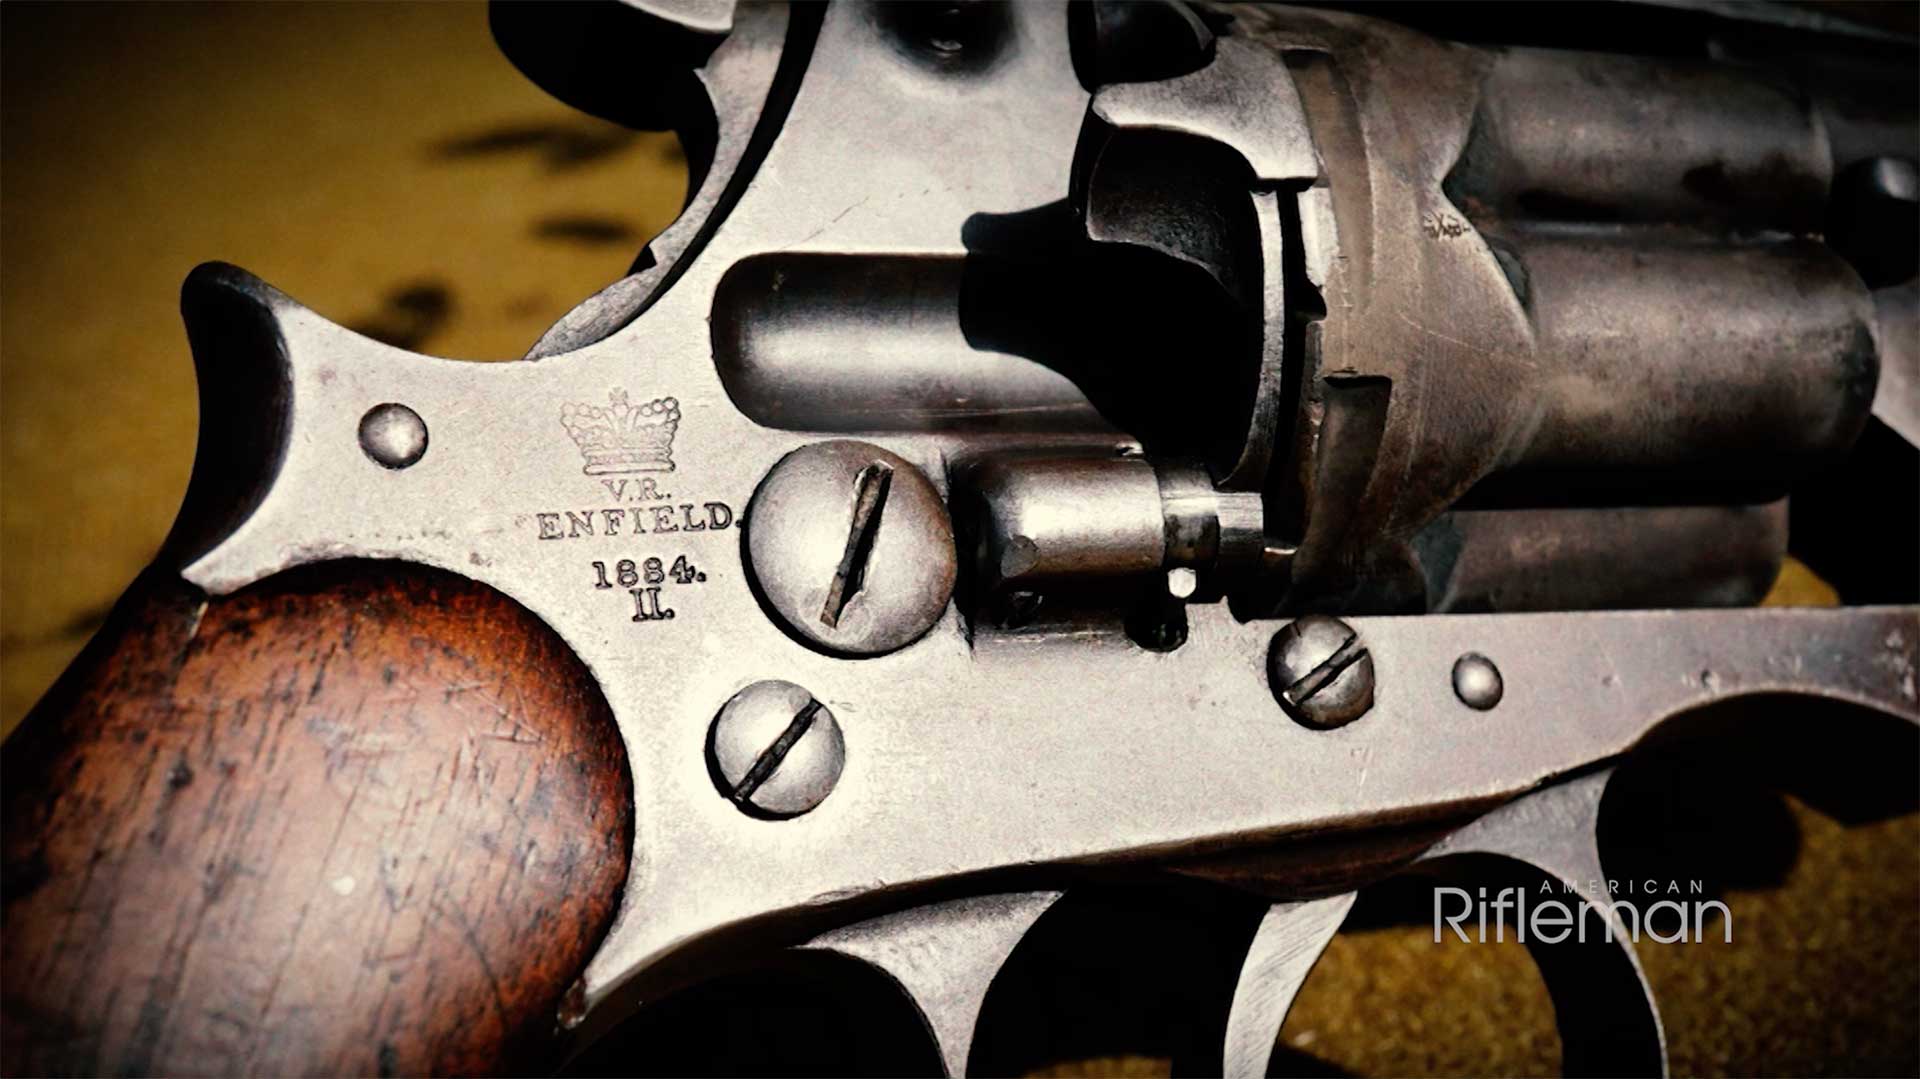 Markings on the right side of this Enfield Mk II revolver dated 1884.